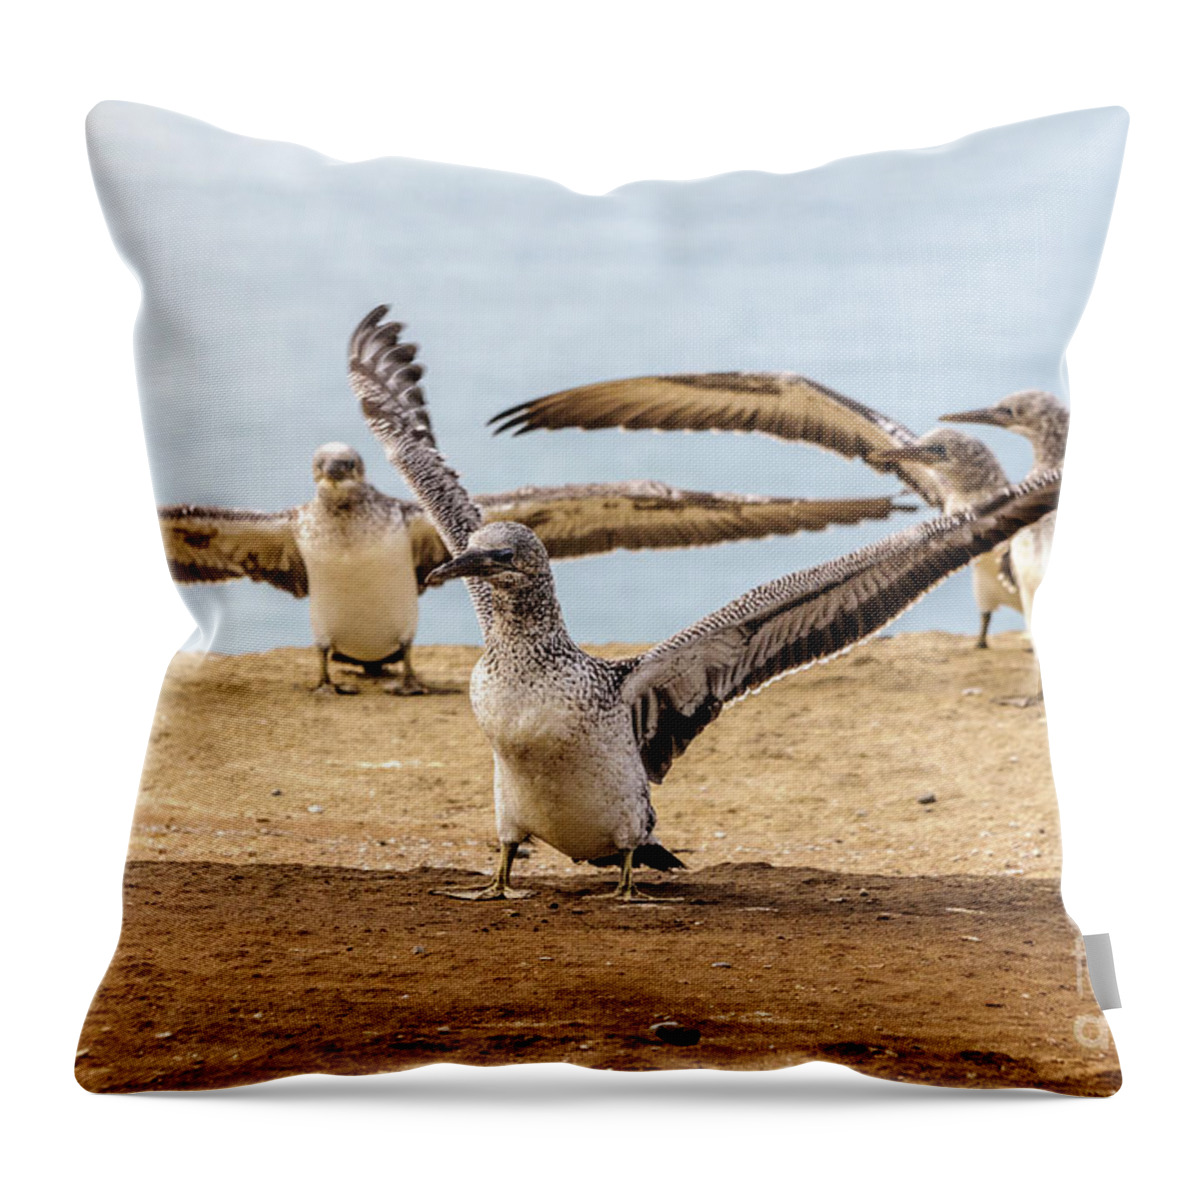 Gannet Throw Pillow featuring the photograph Gannet Chick 2 - Flying School by Werner Padarin